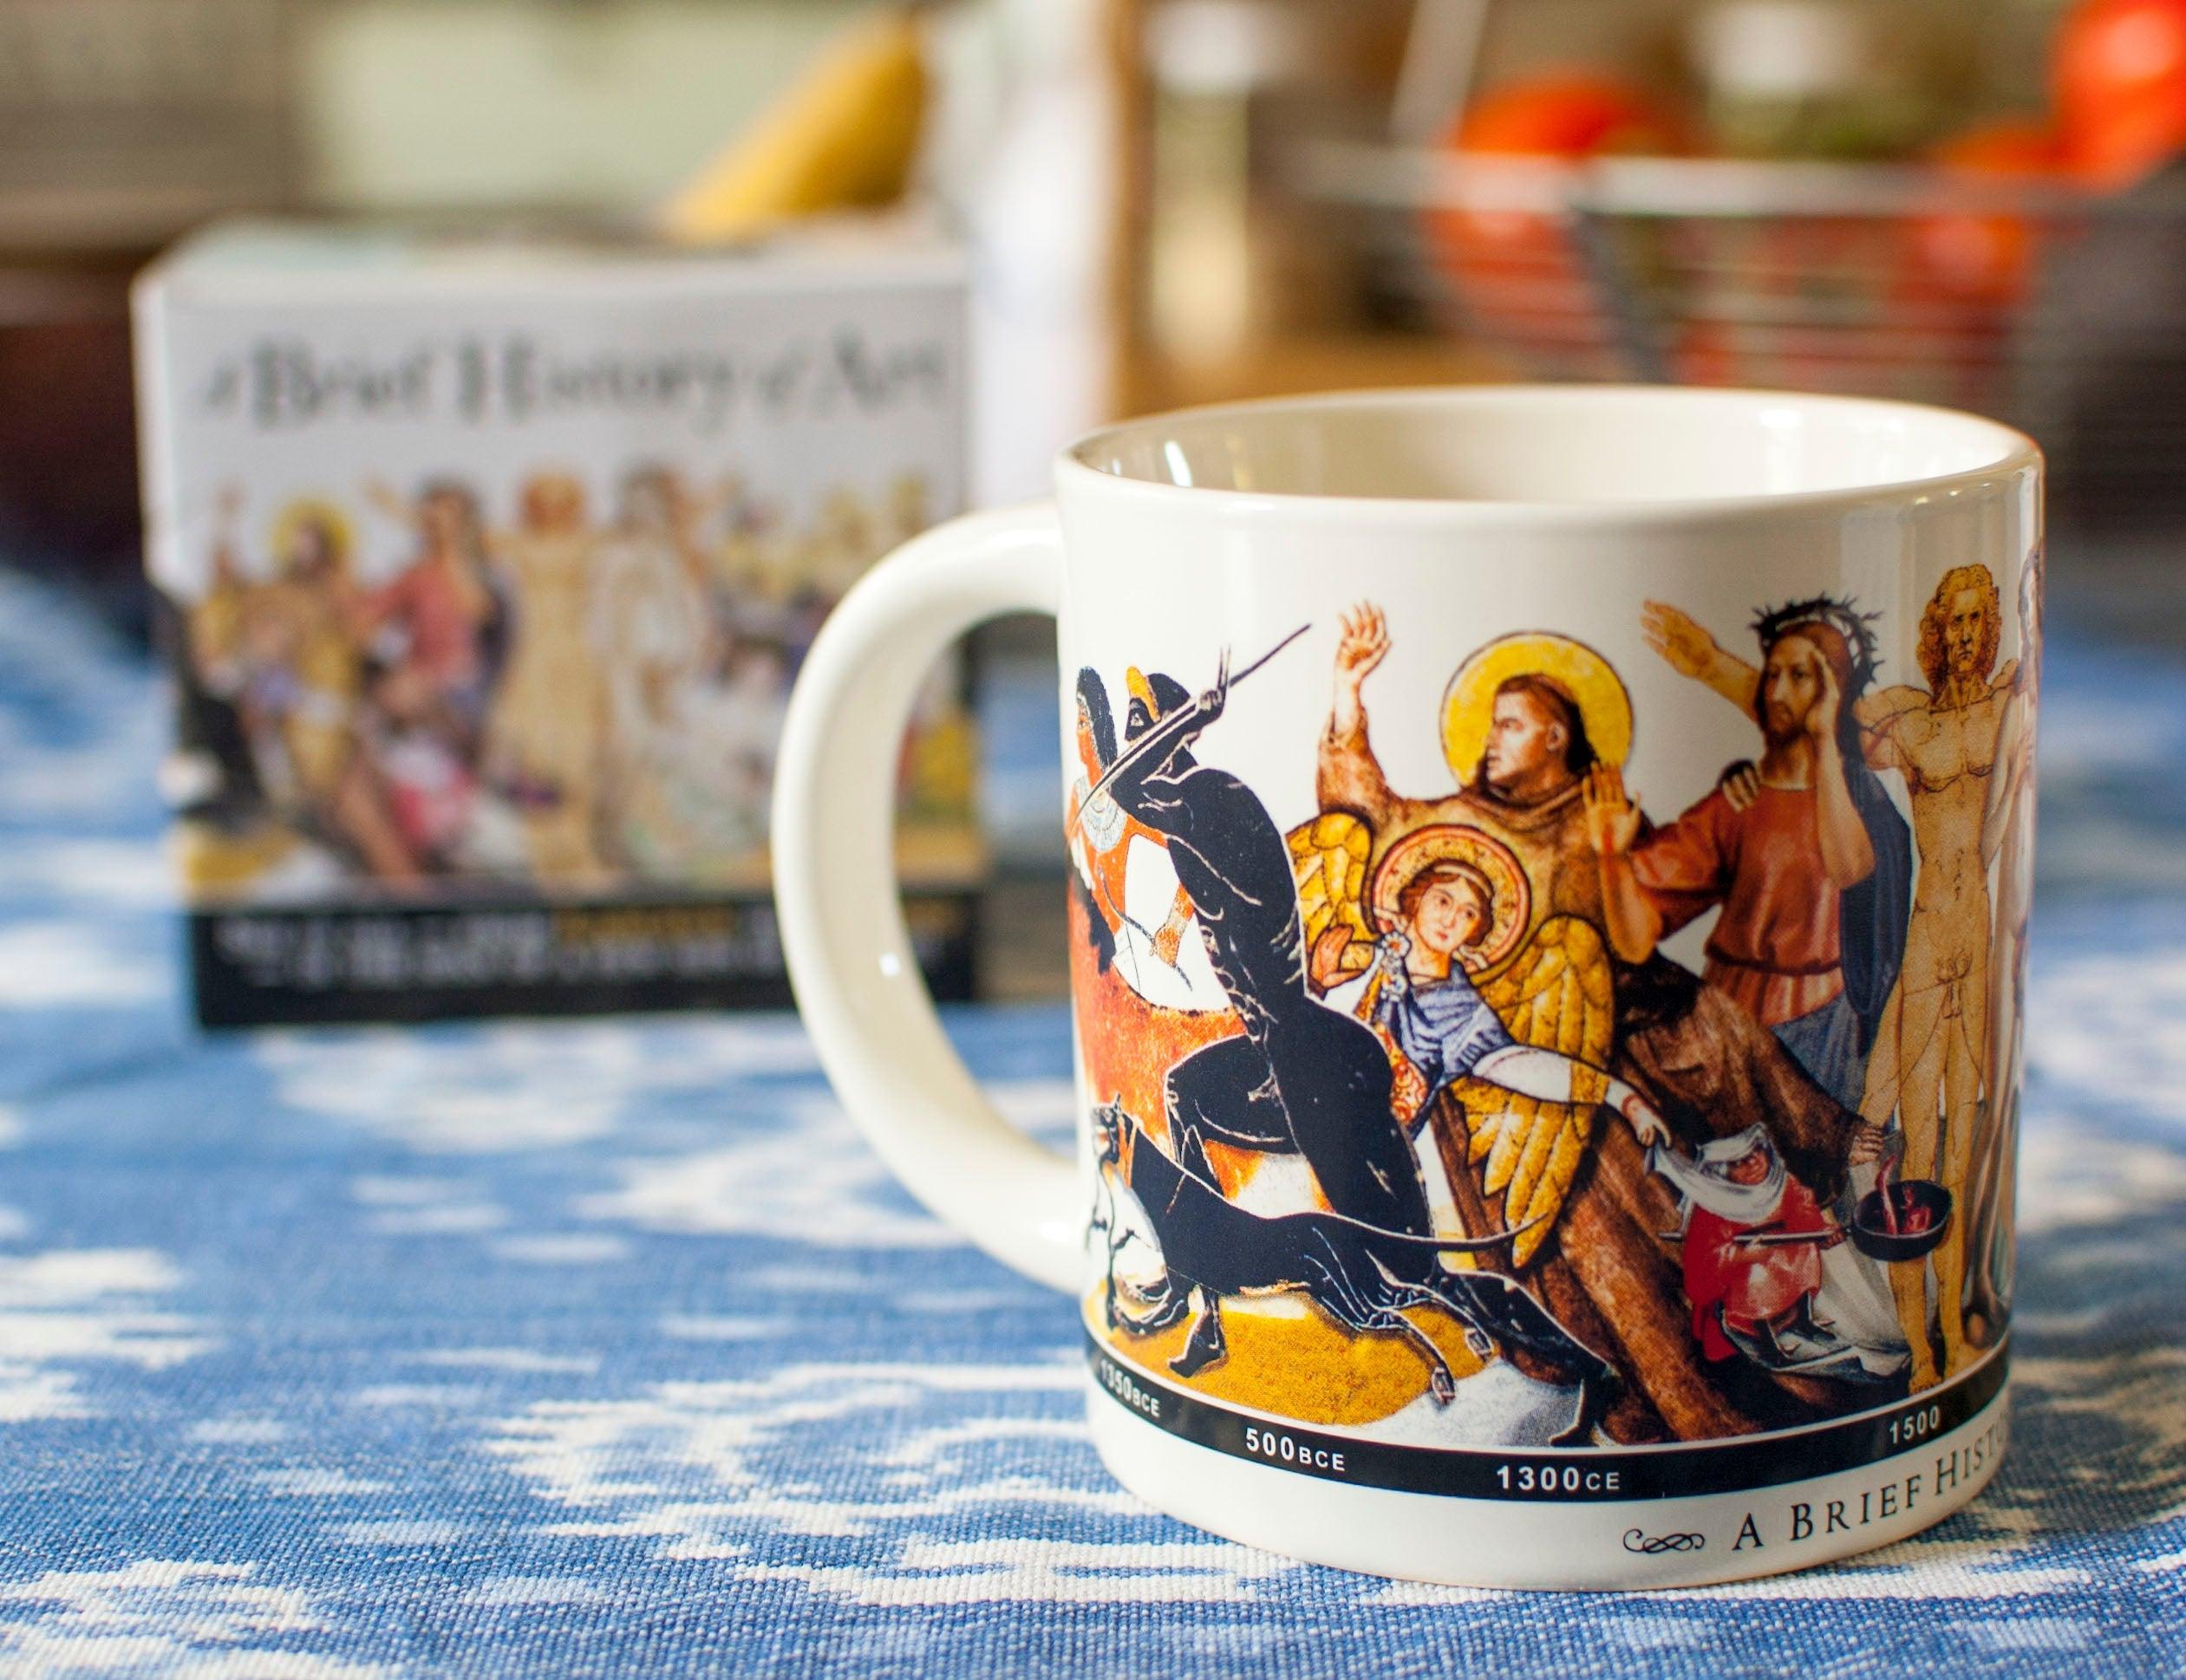 Product photo of Brief History of Art Mug, a novelty gift manufactured by The Unemployed Philosophers Guild.